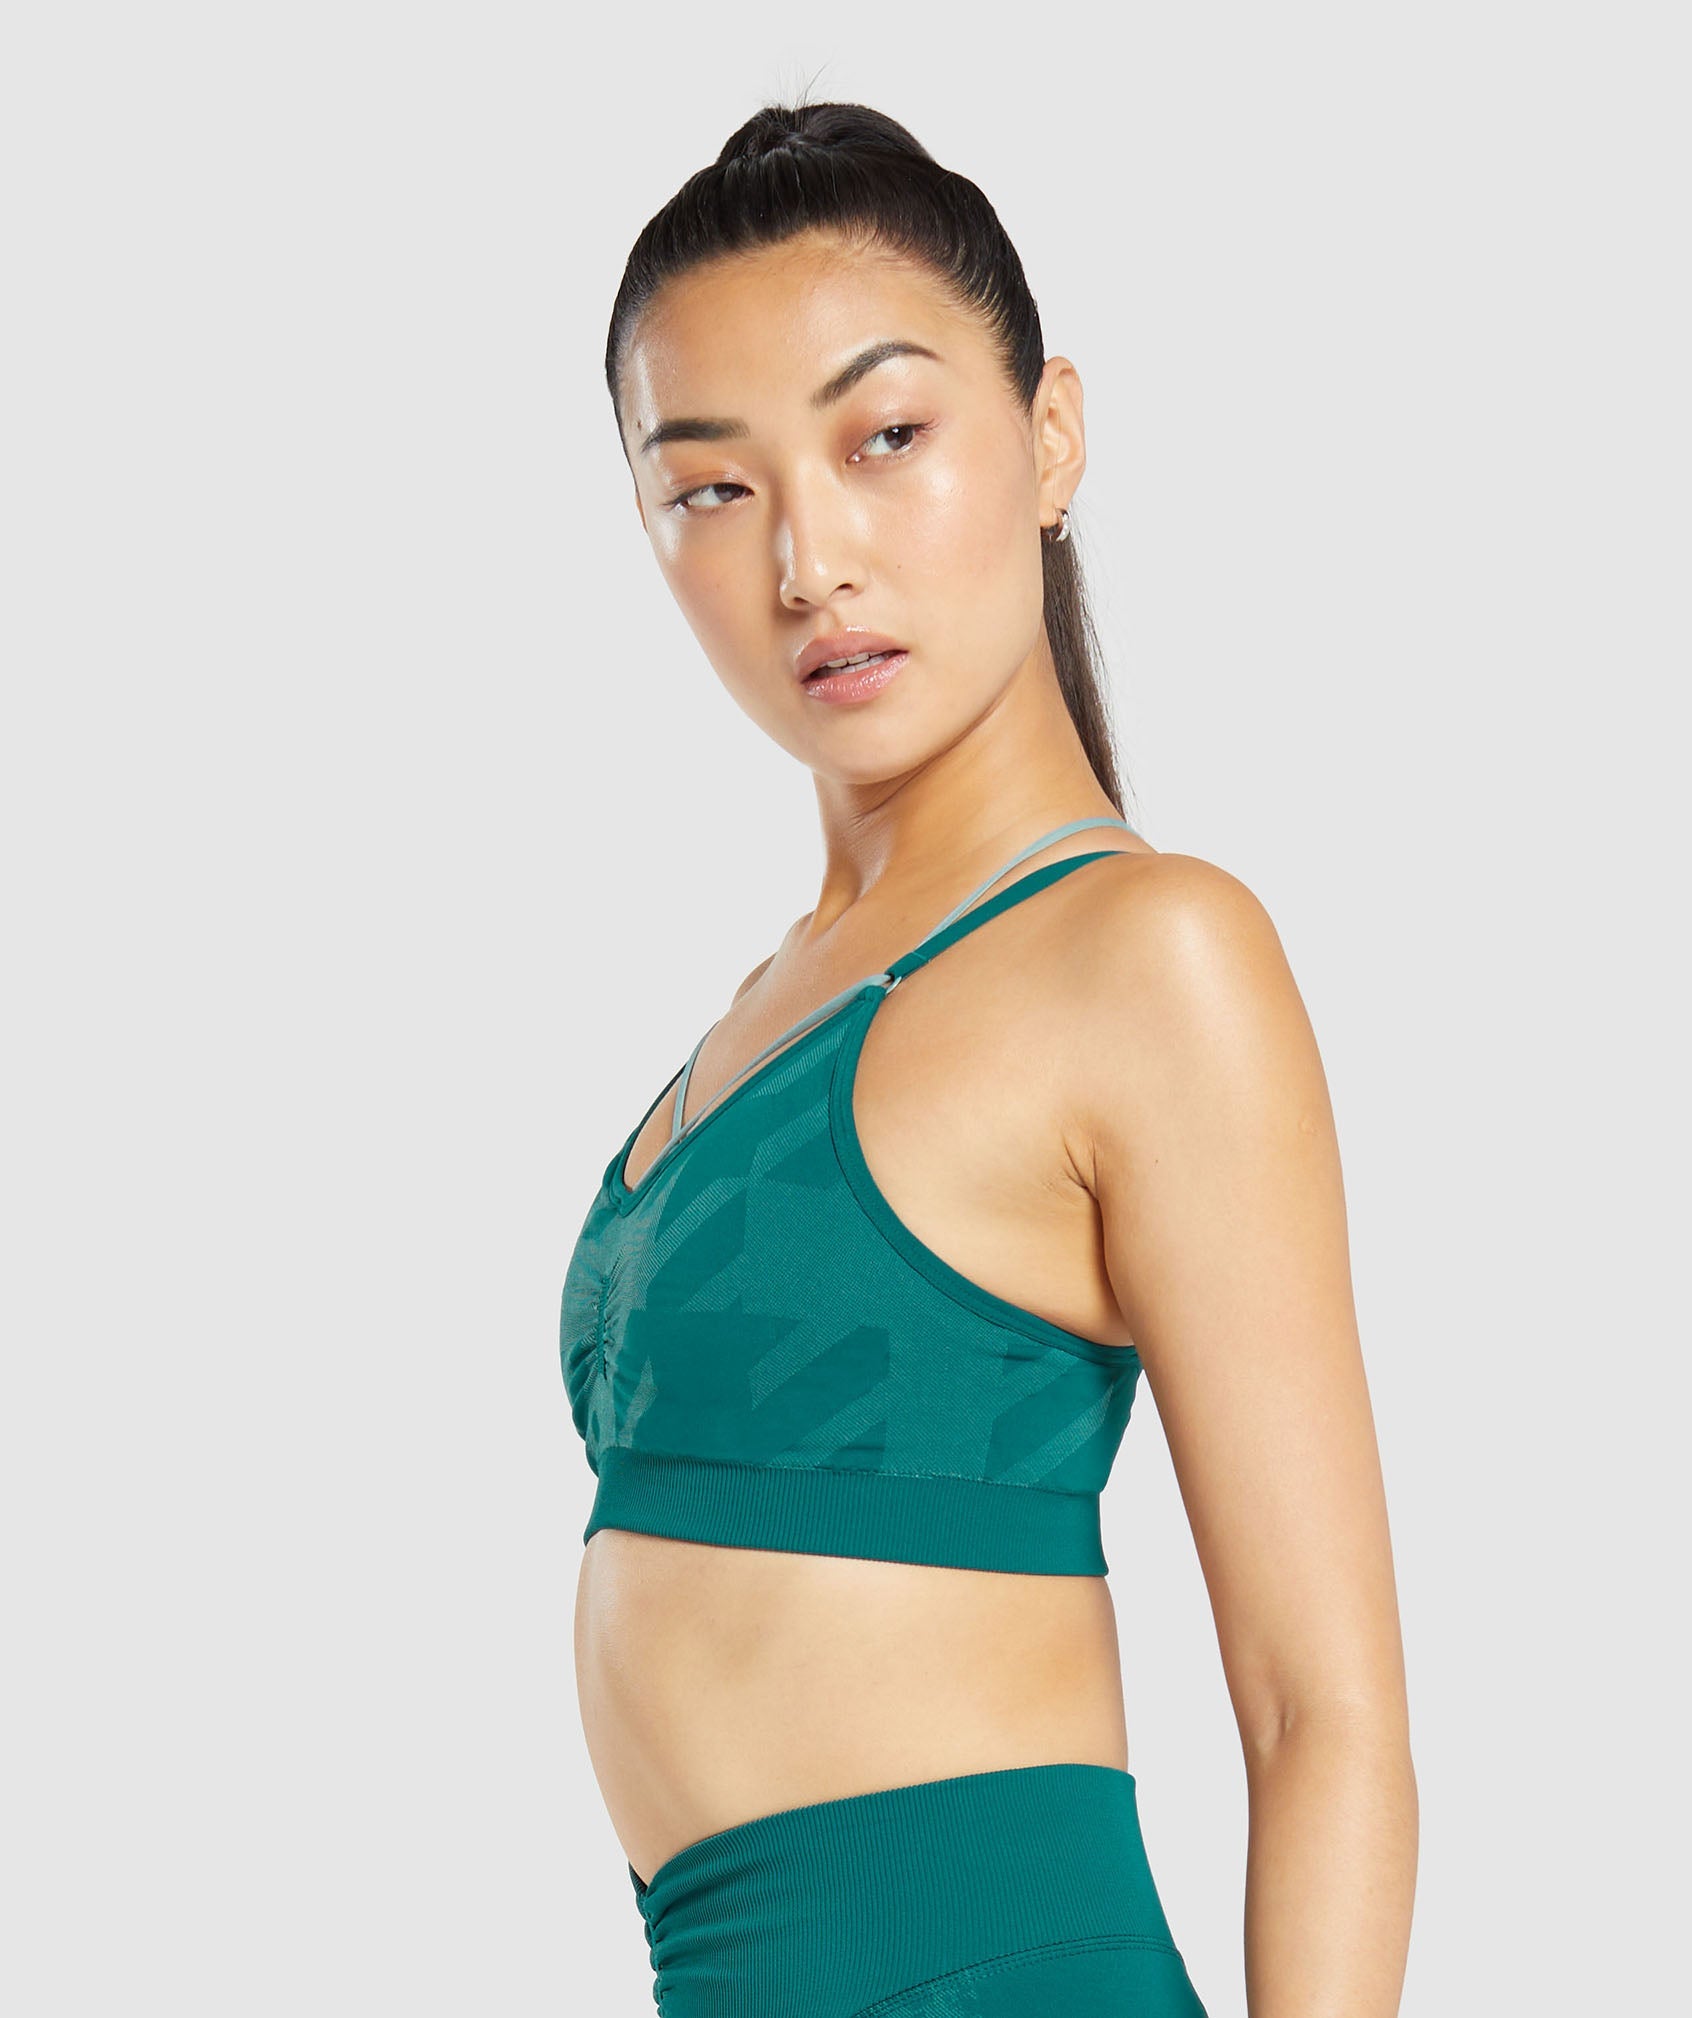 Apex Limit Seamless Ruched Sports Bra in Deep Teal/Duck Egg Blue - view 5